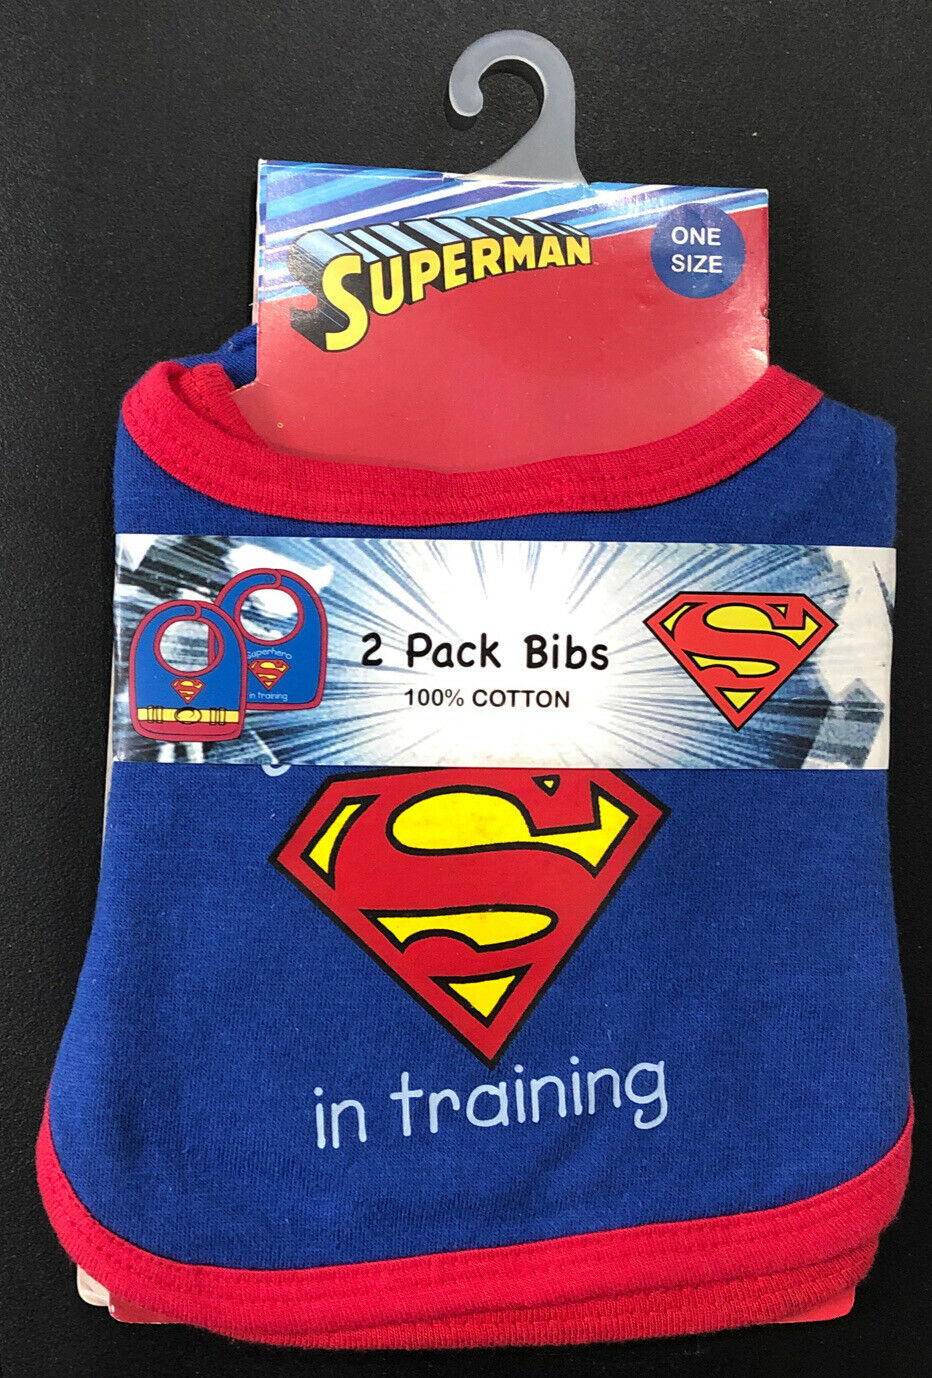 Brand New Dc Comics Superman Baby Toddler Infant Bibs 2 Pack 100% Cotton